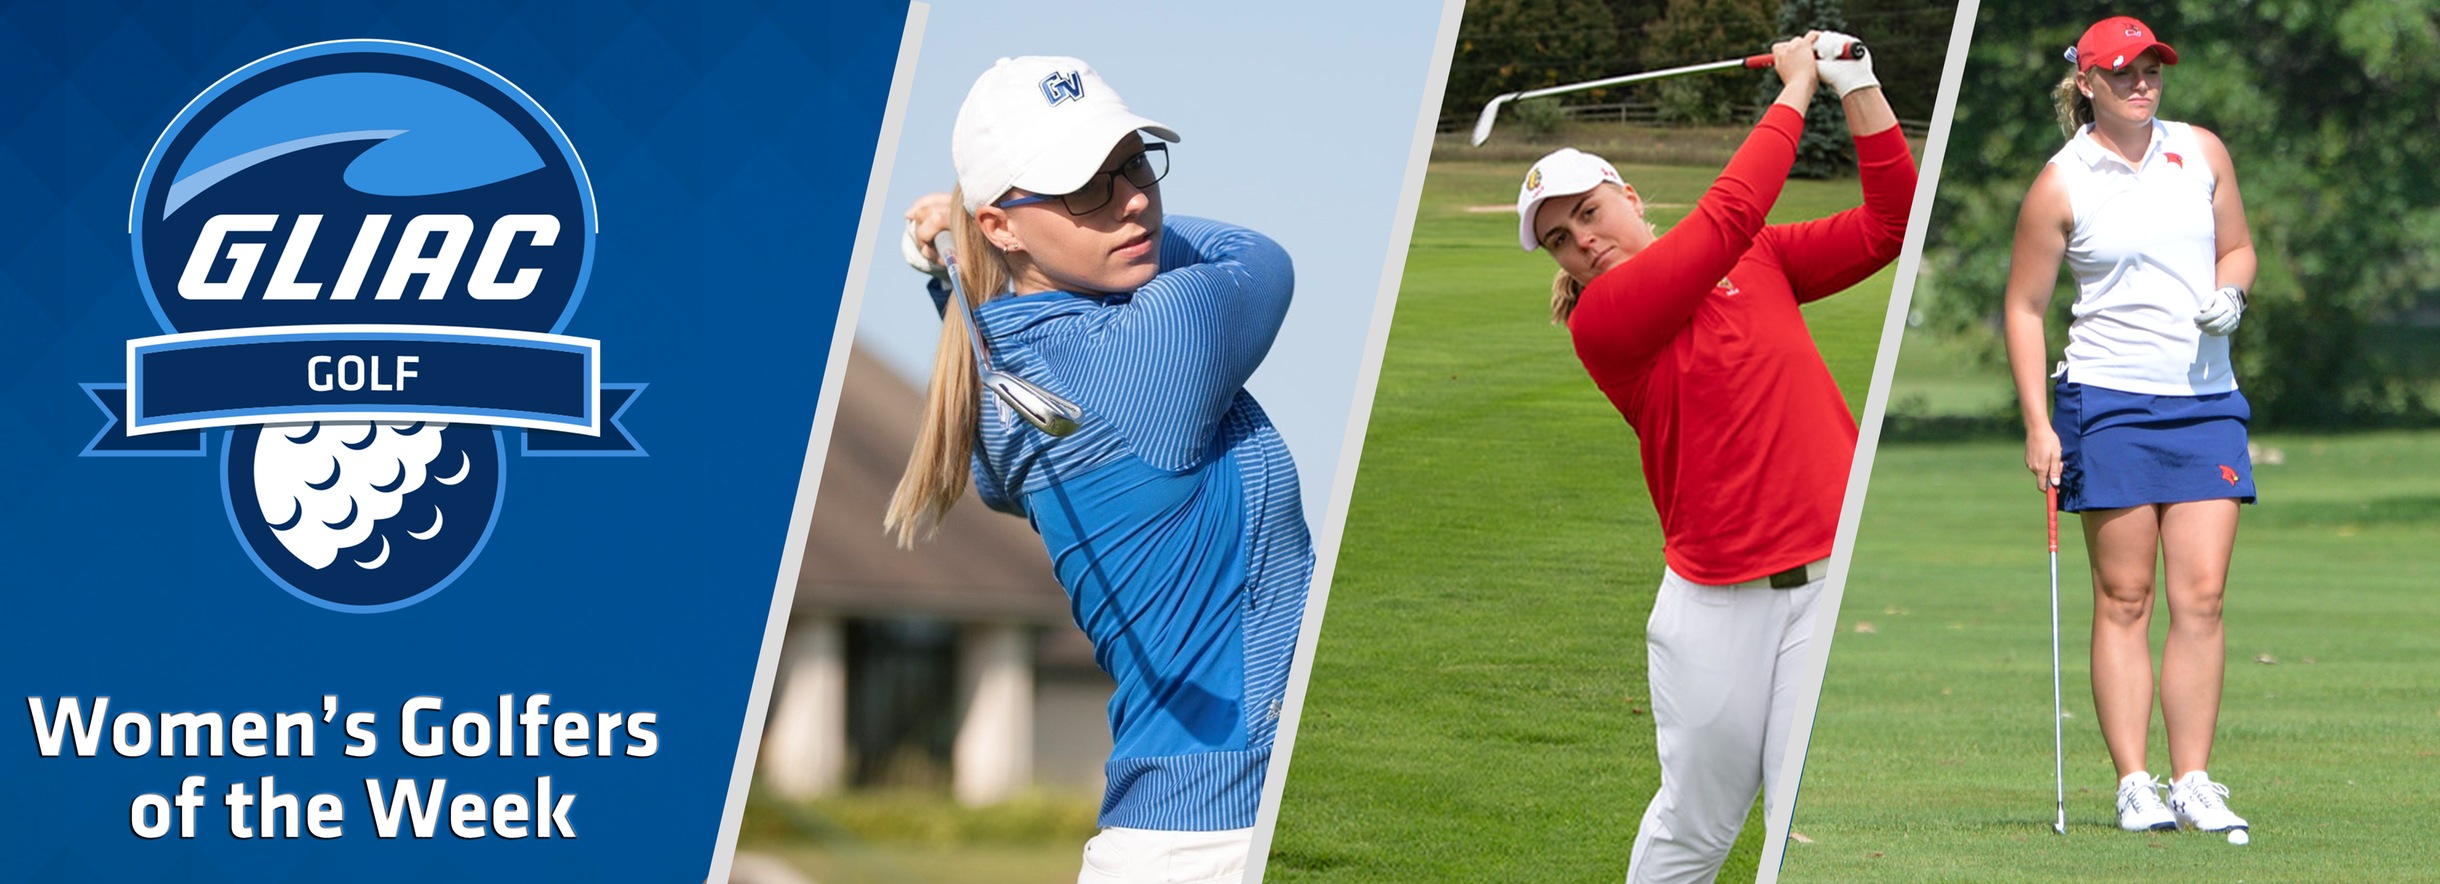 GLIAC Announces Female Golfers of the Week for the Month of September